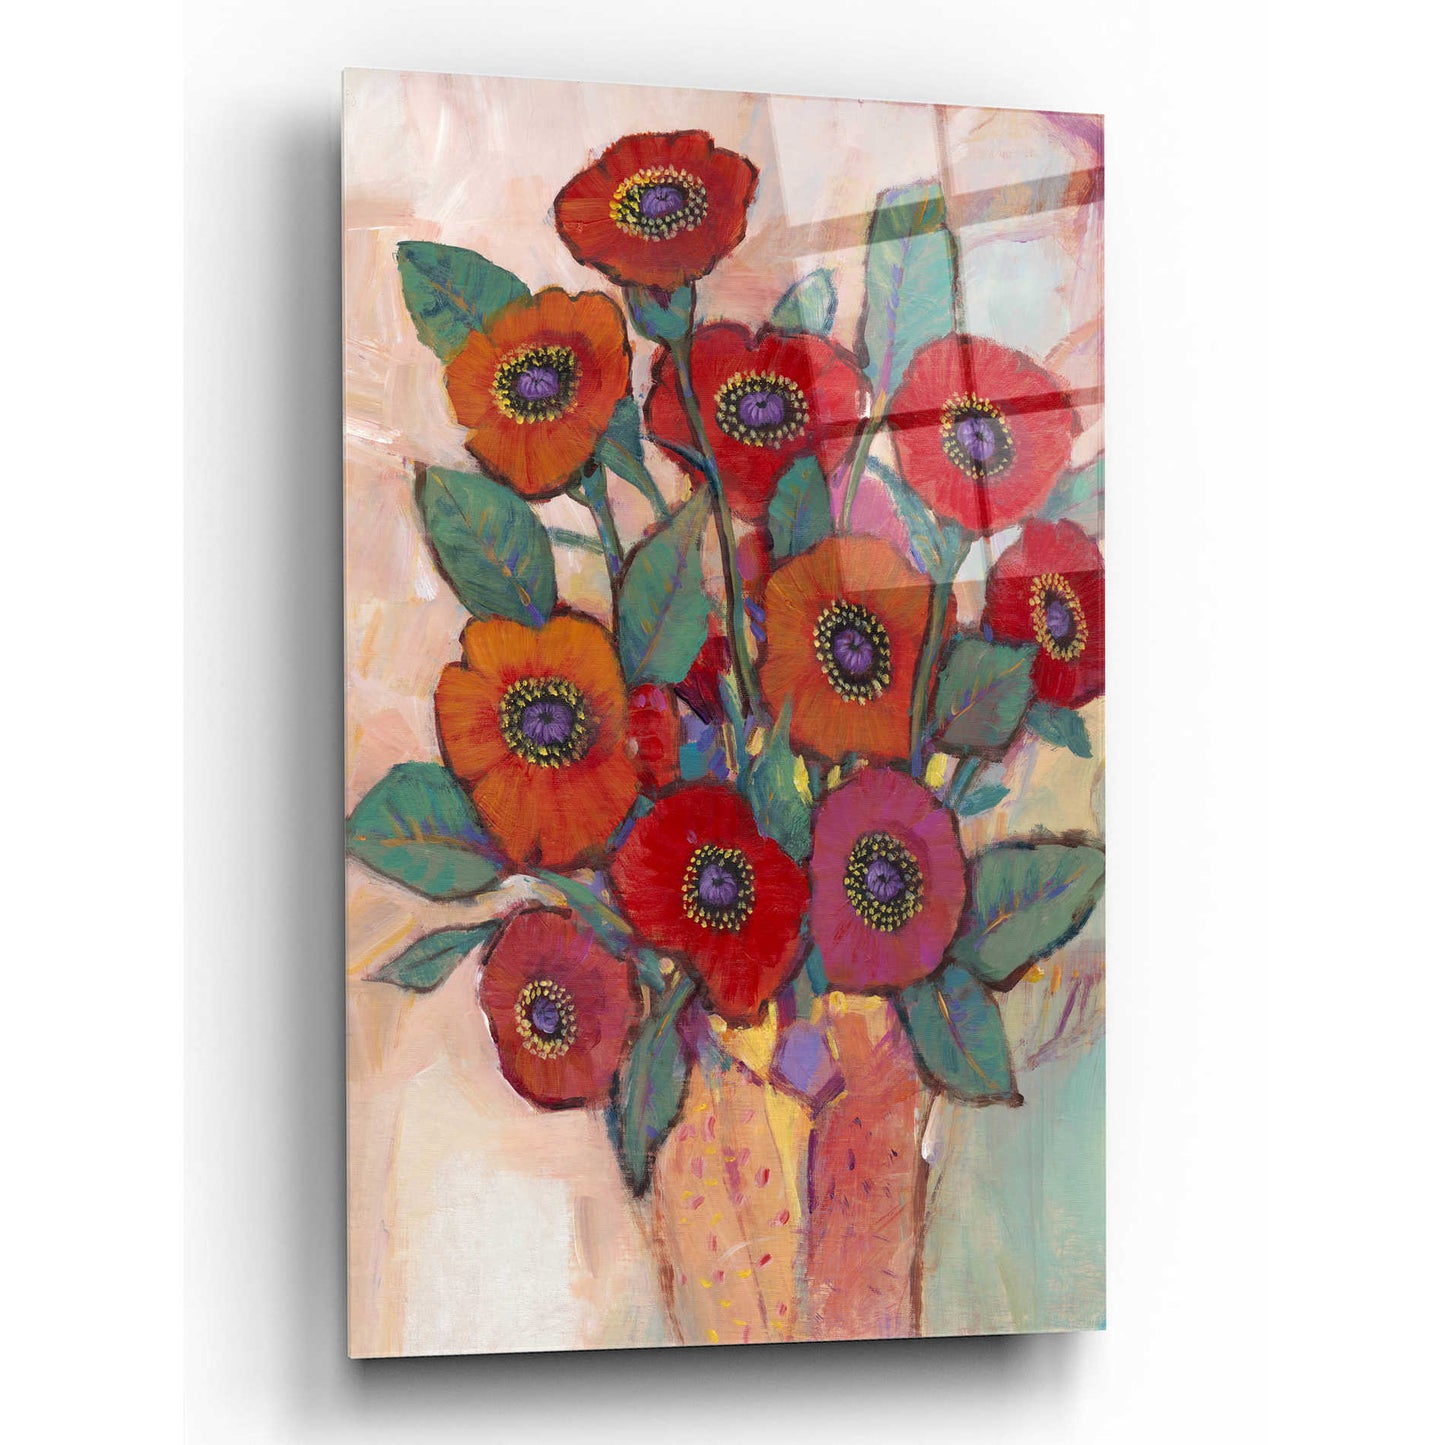 Epic Art 'Poppies in a Vase II' by Tim O'Toole, Acrylic Glass Wall Art,16x24